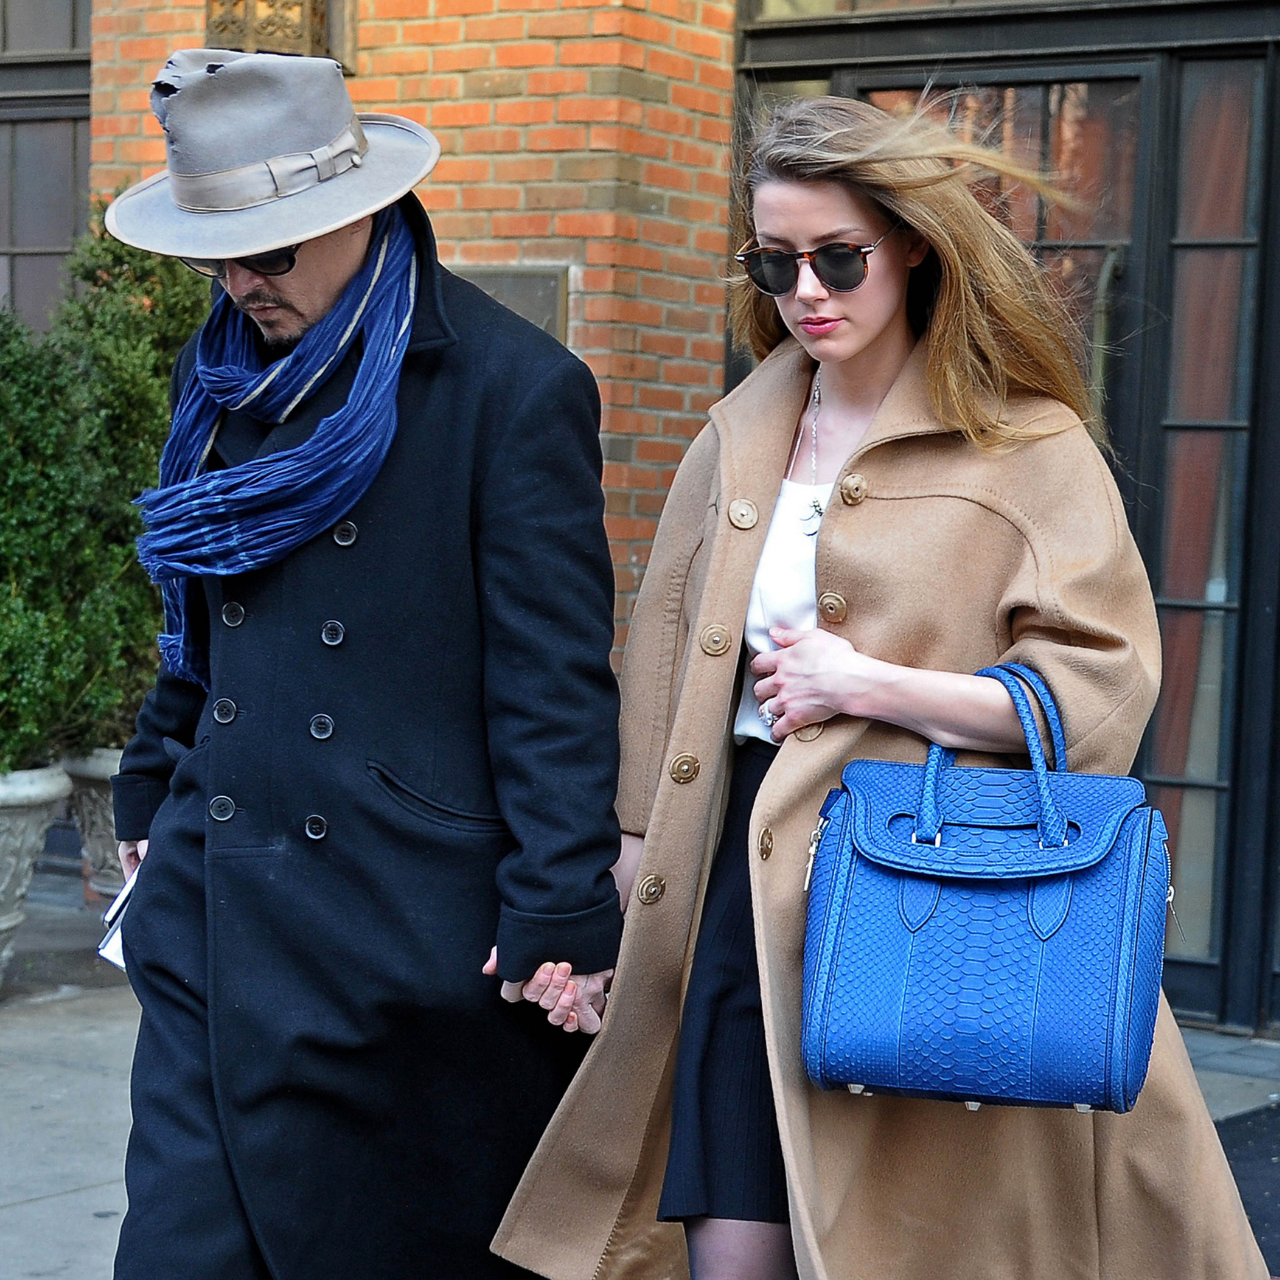 Celebrity sighting of Johnny Depp and Amber Heard in NYC 2014